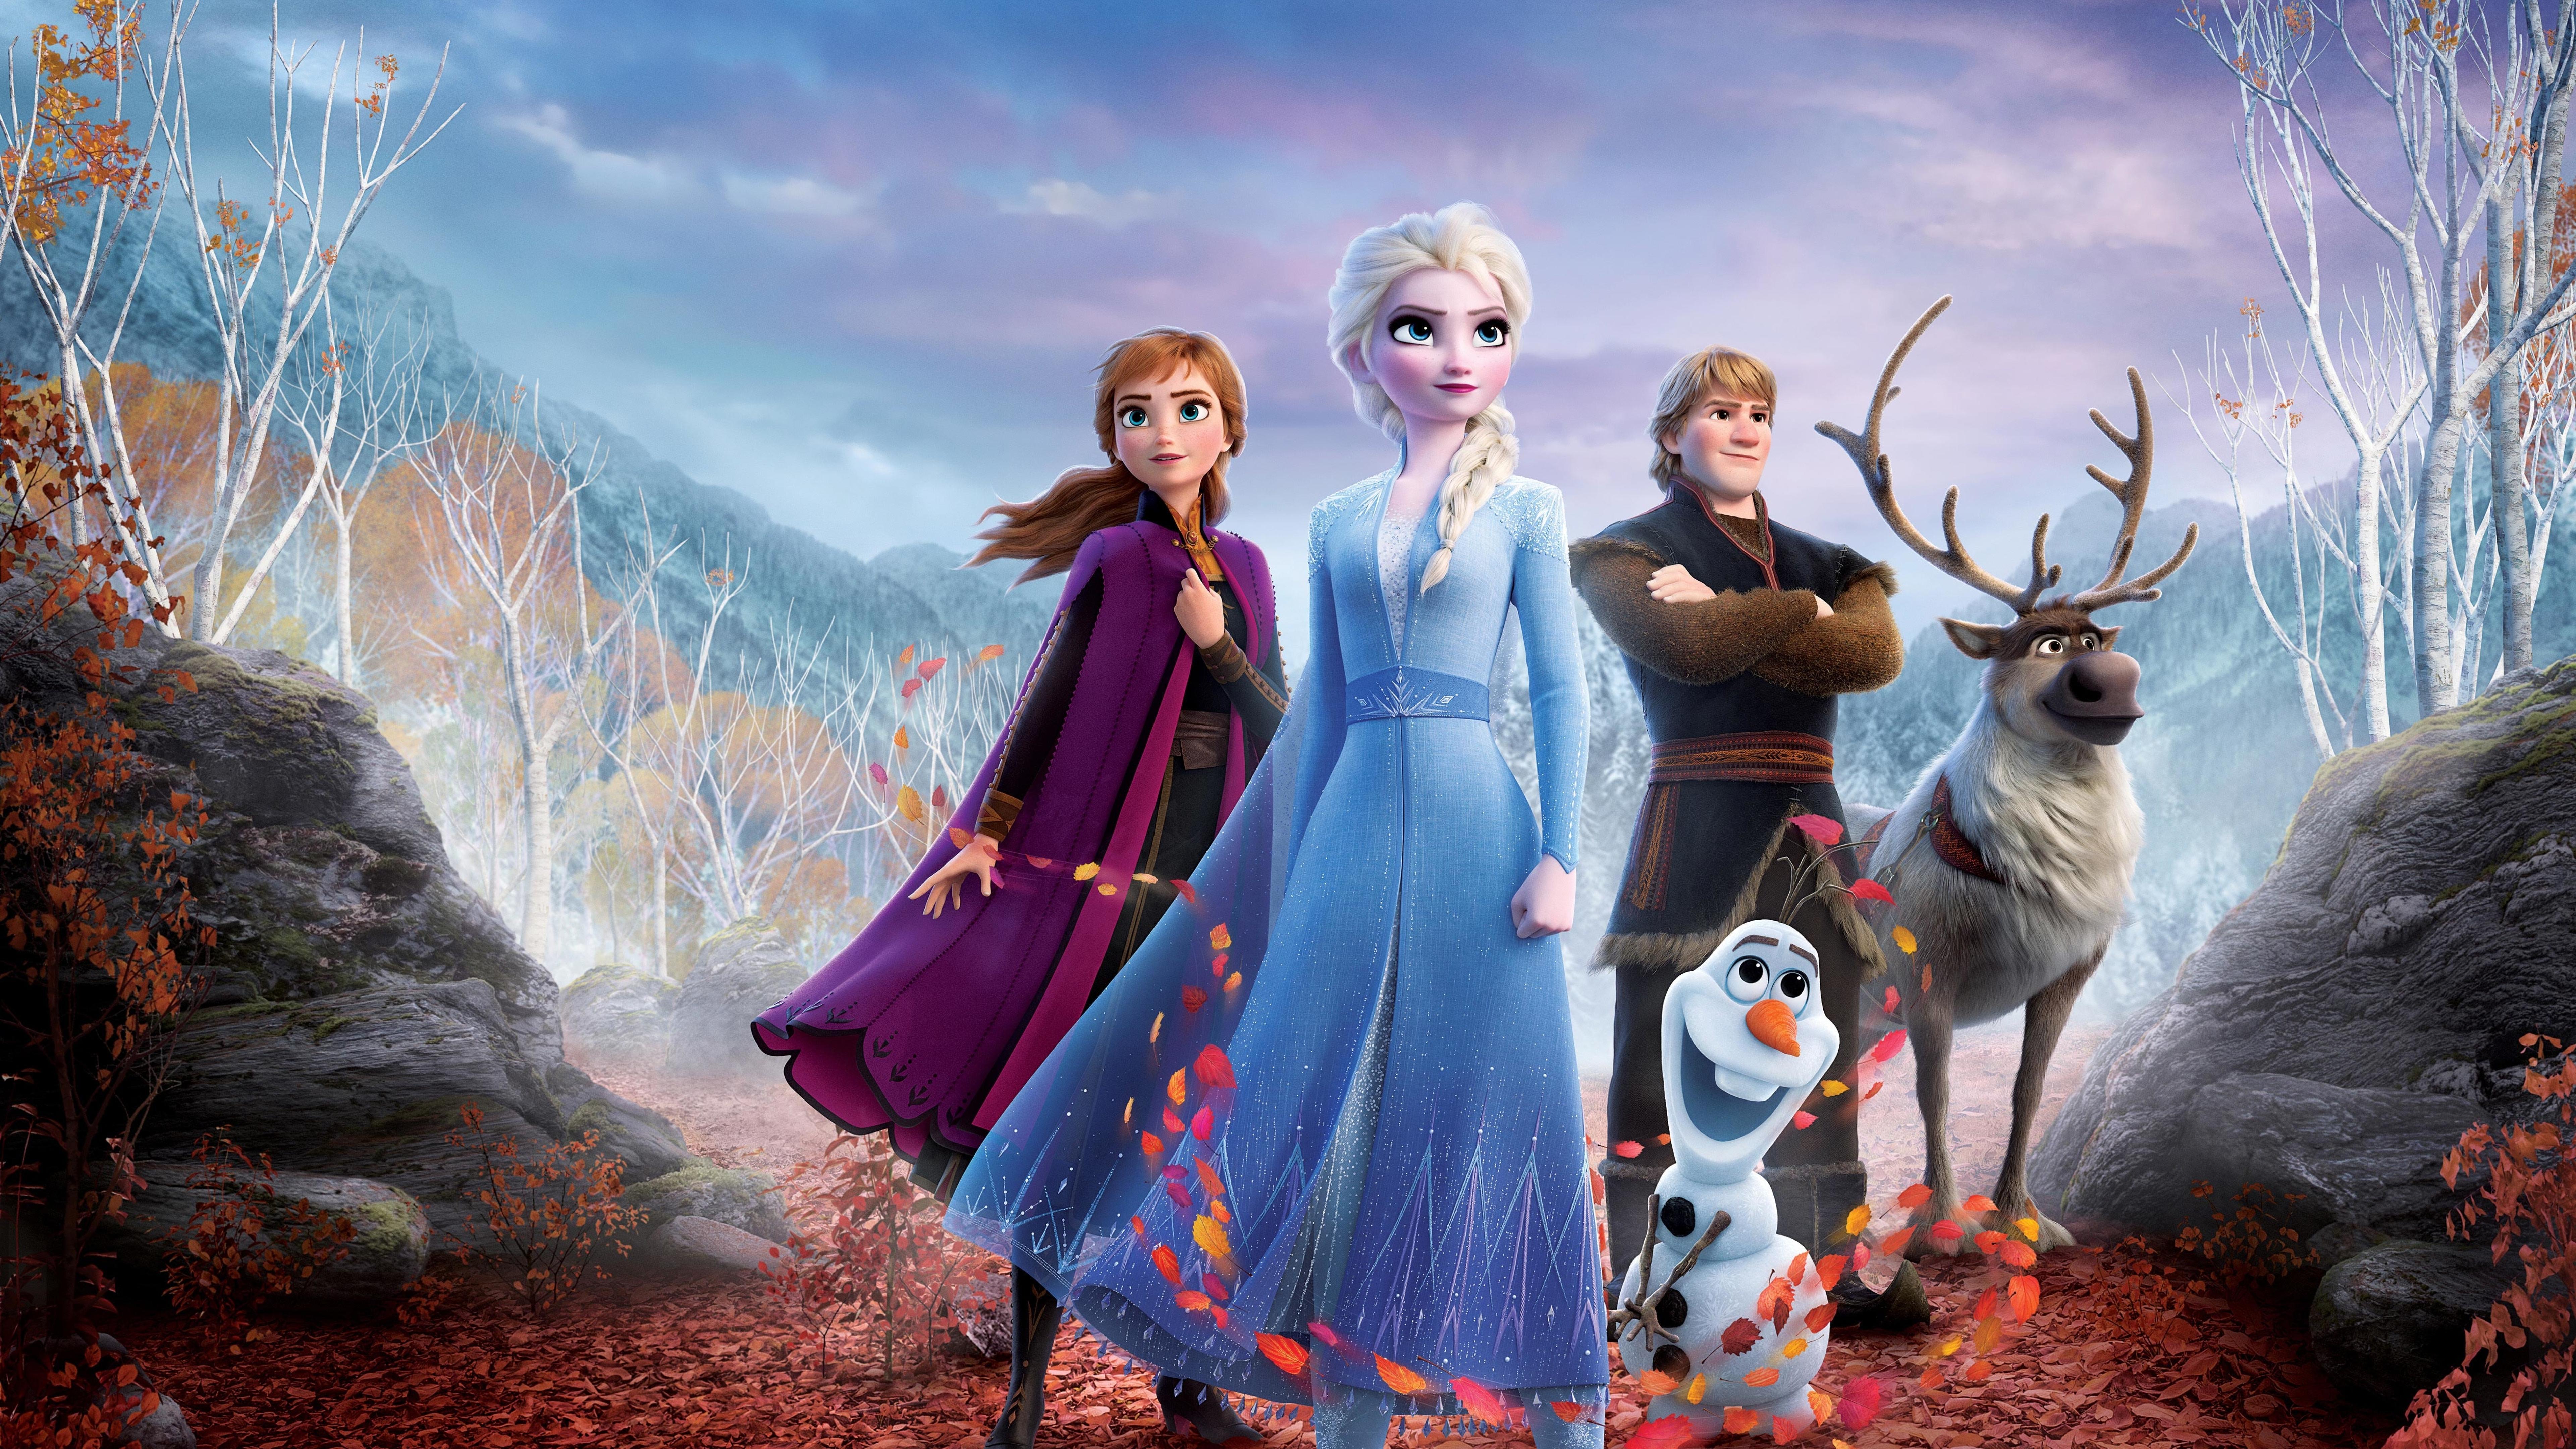 Frozen 2 8K Wallpaper, HD Movies 4K Wallpaper, Image, Photo and Background